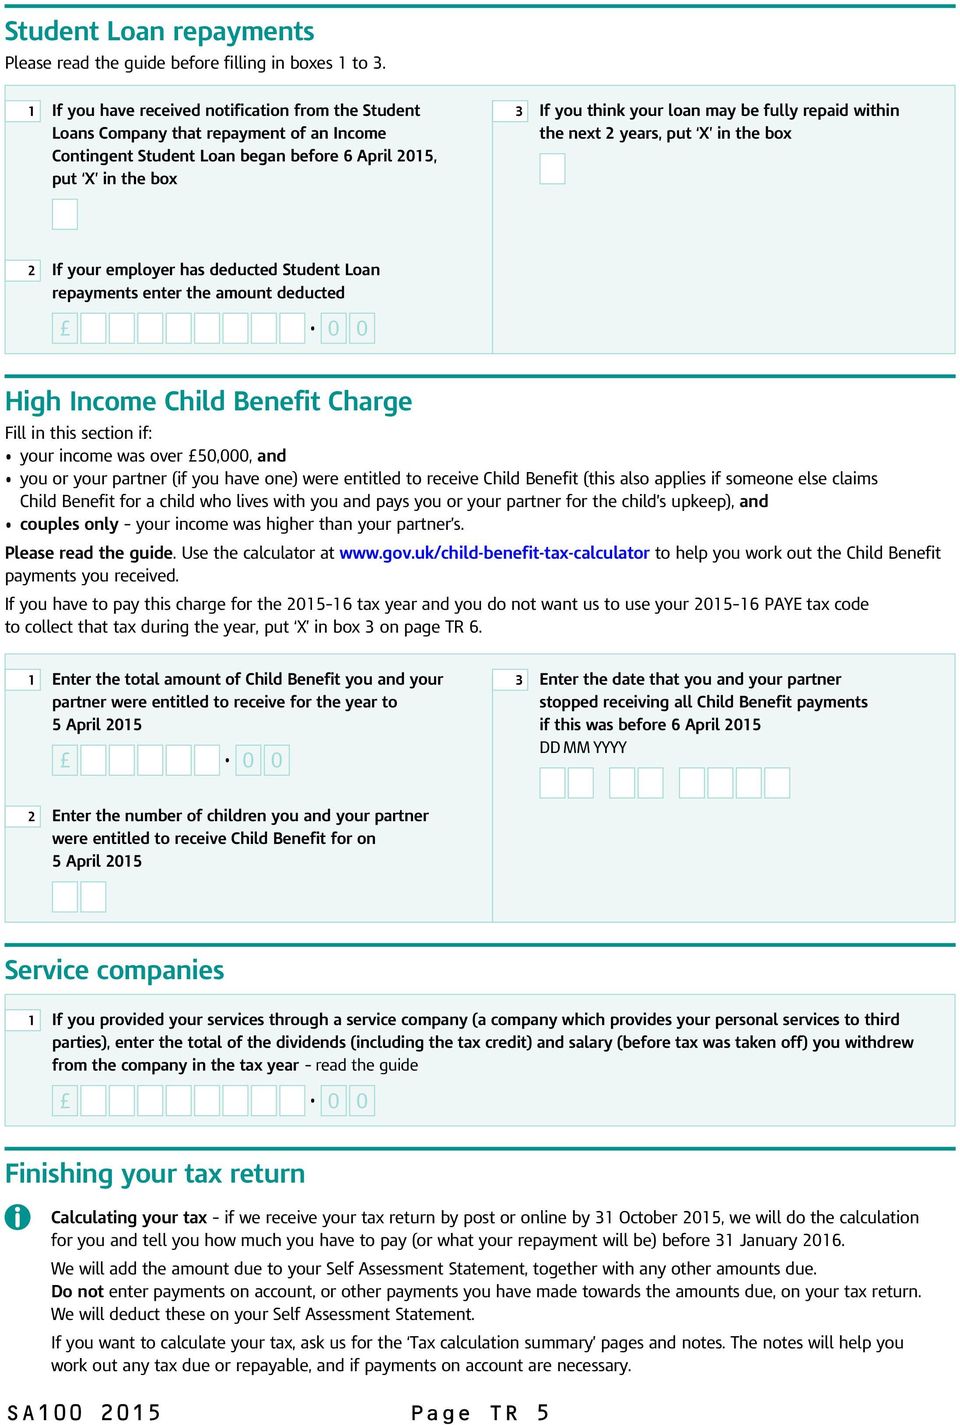 fully repaid within the next 2 years, put X in the box 2 If your employer has deducted Student Loan repayments enter the amount deducted High Income Child Benefit Charge Fill in this section if: your